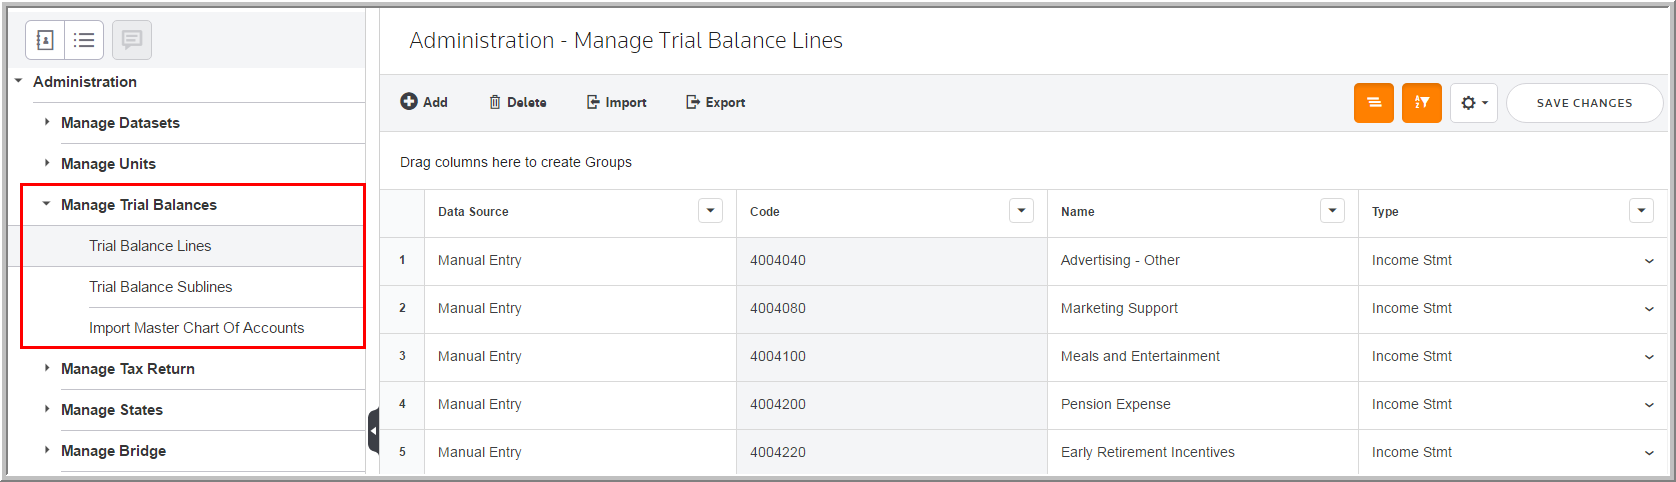 2016 Functionality Manage Trial Balance